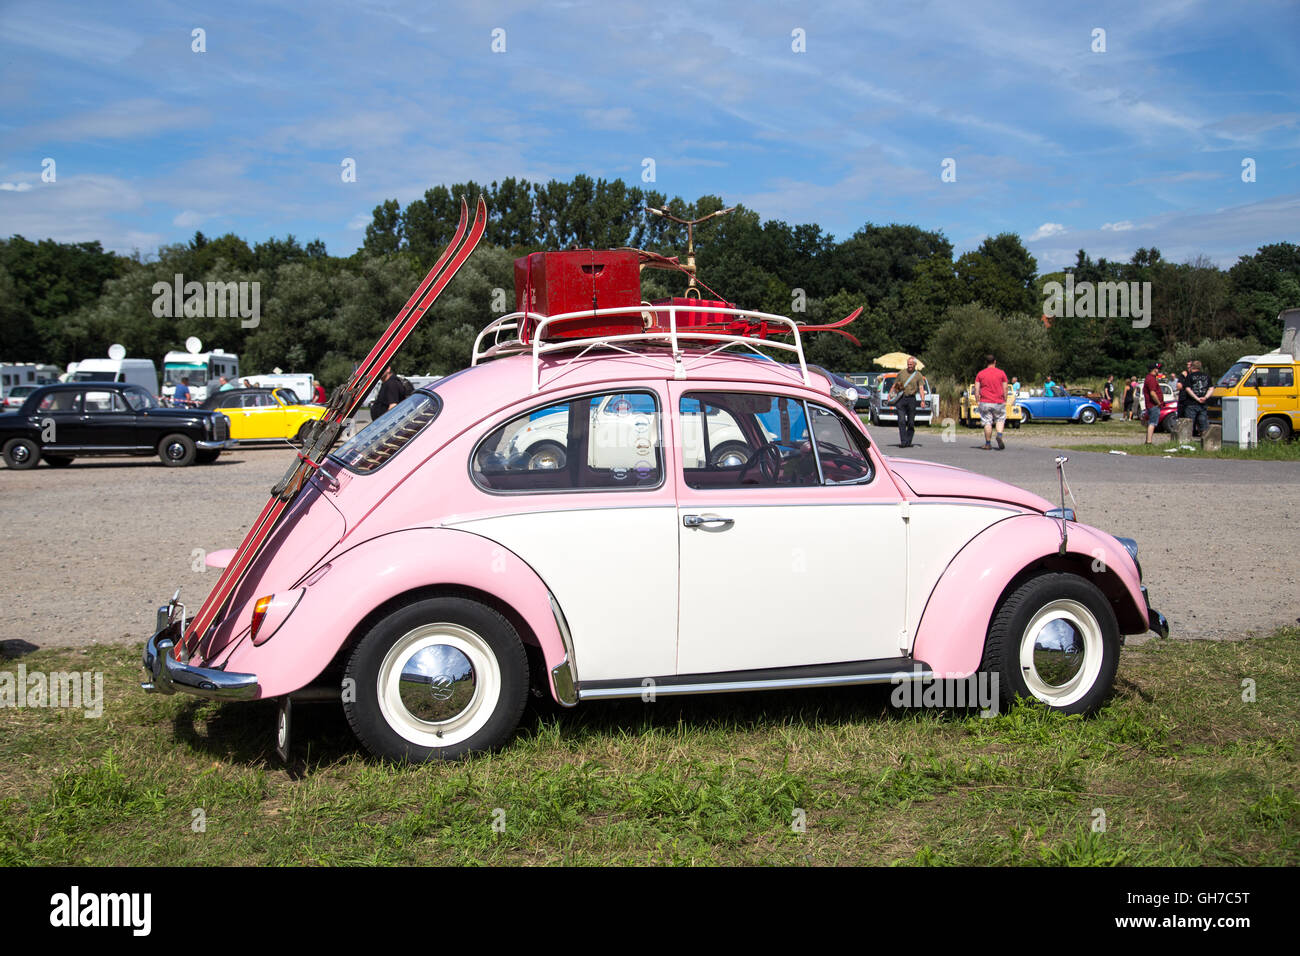 Celle, Germany - August 7, 2016: A pink Volkswagen Kaefer at the annual Kaefer Meeting Stock Photo